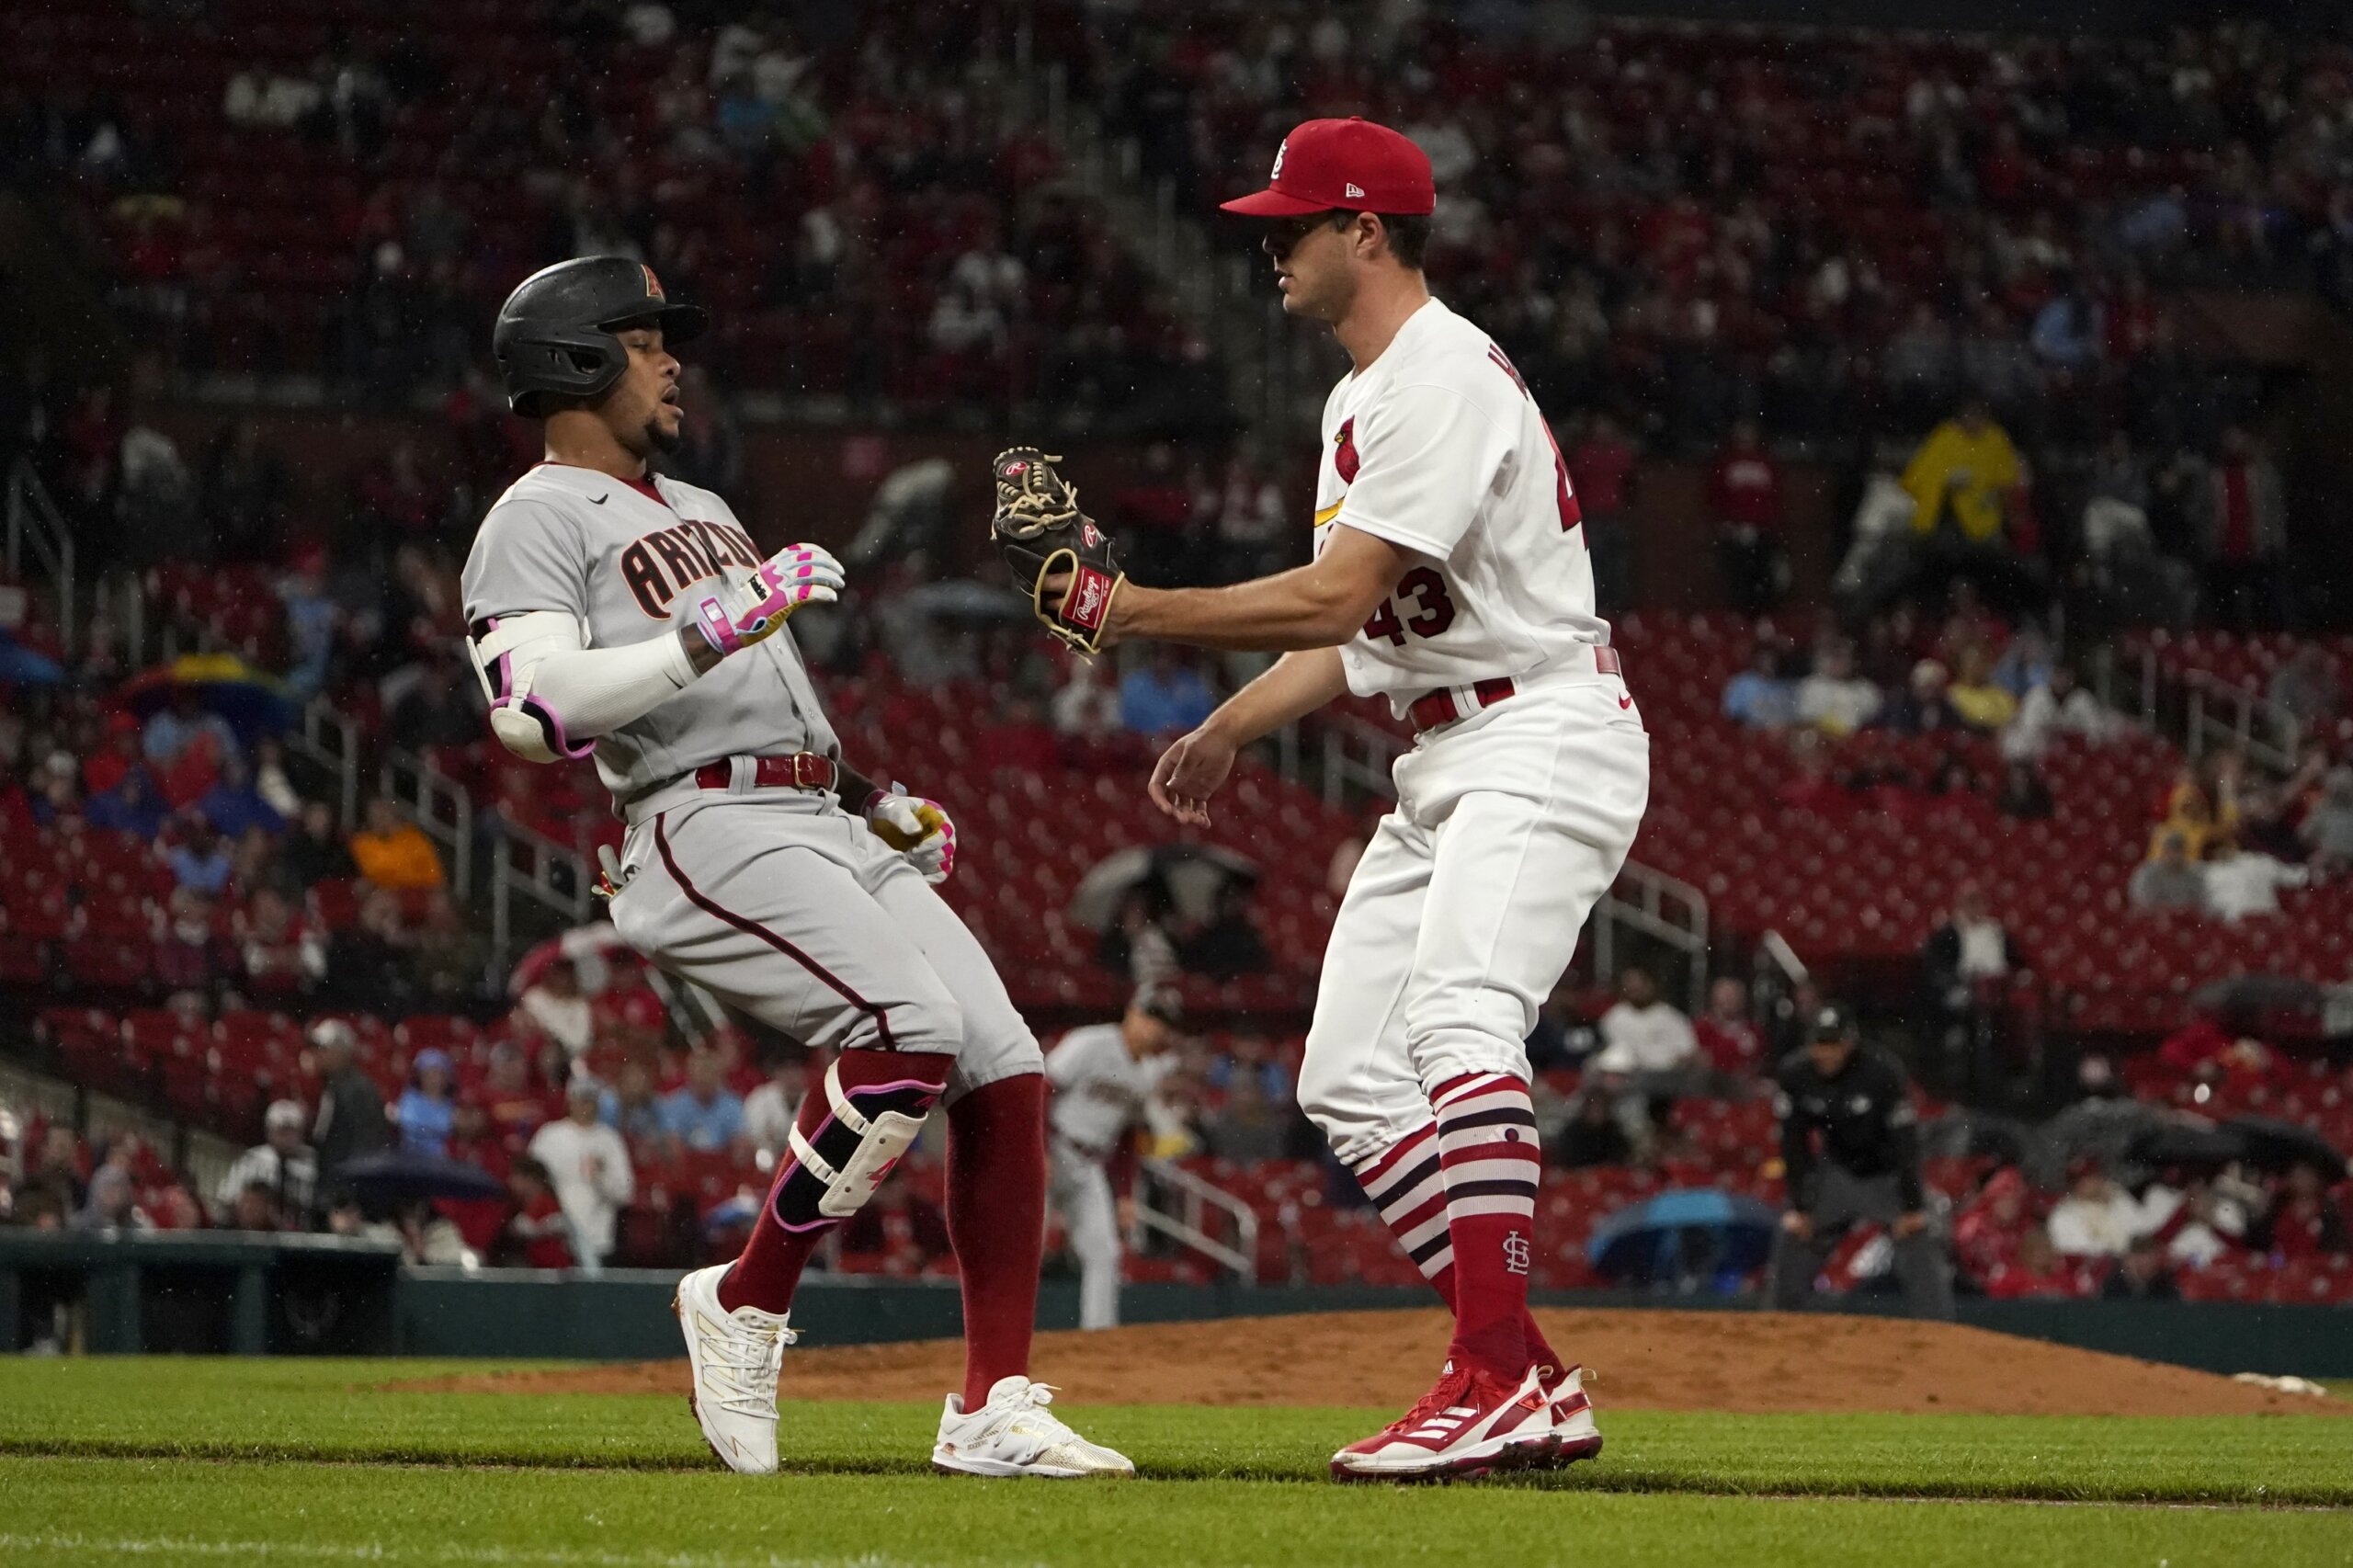 Bader's infield single lifts Cardinals past Giants 2-1 - WTOP News